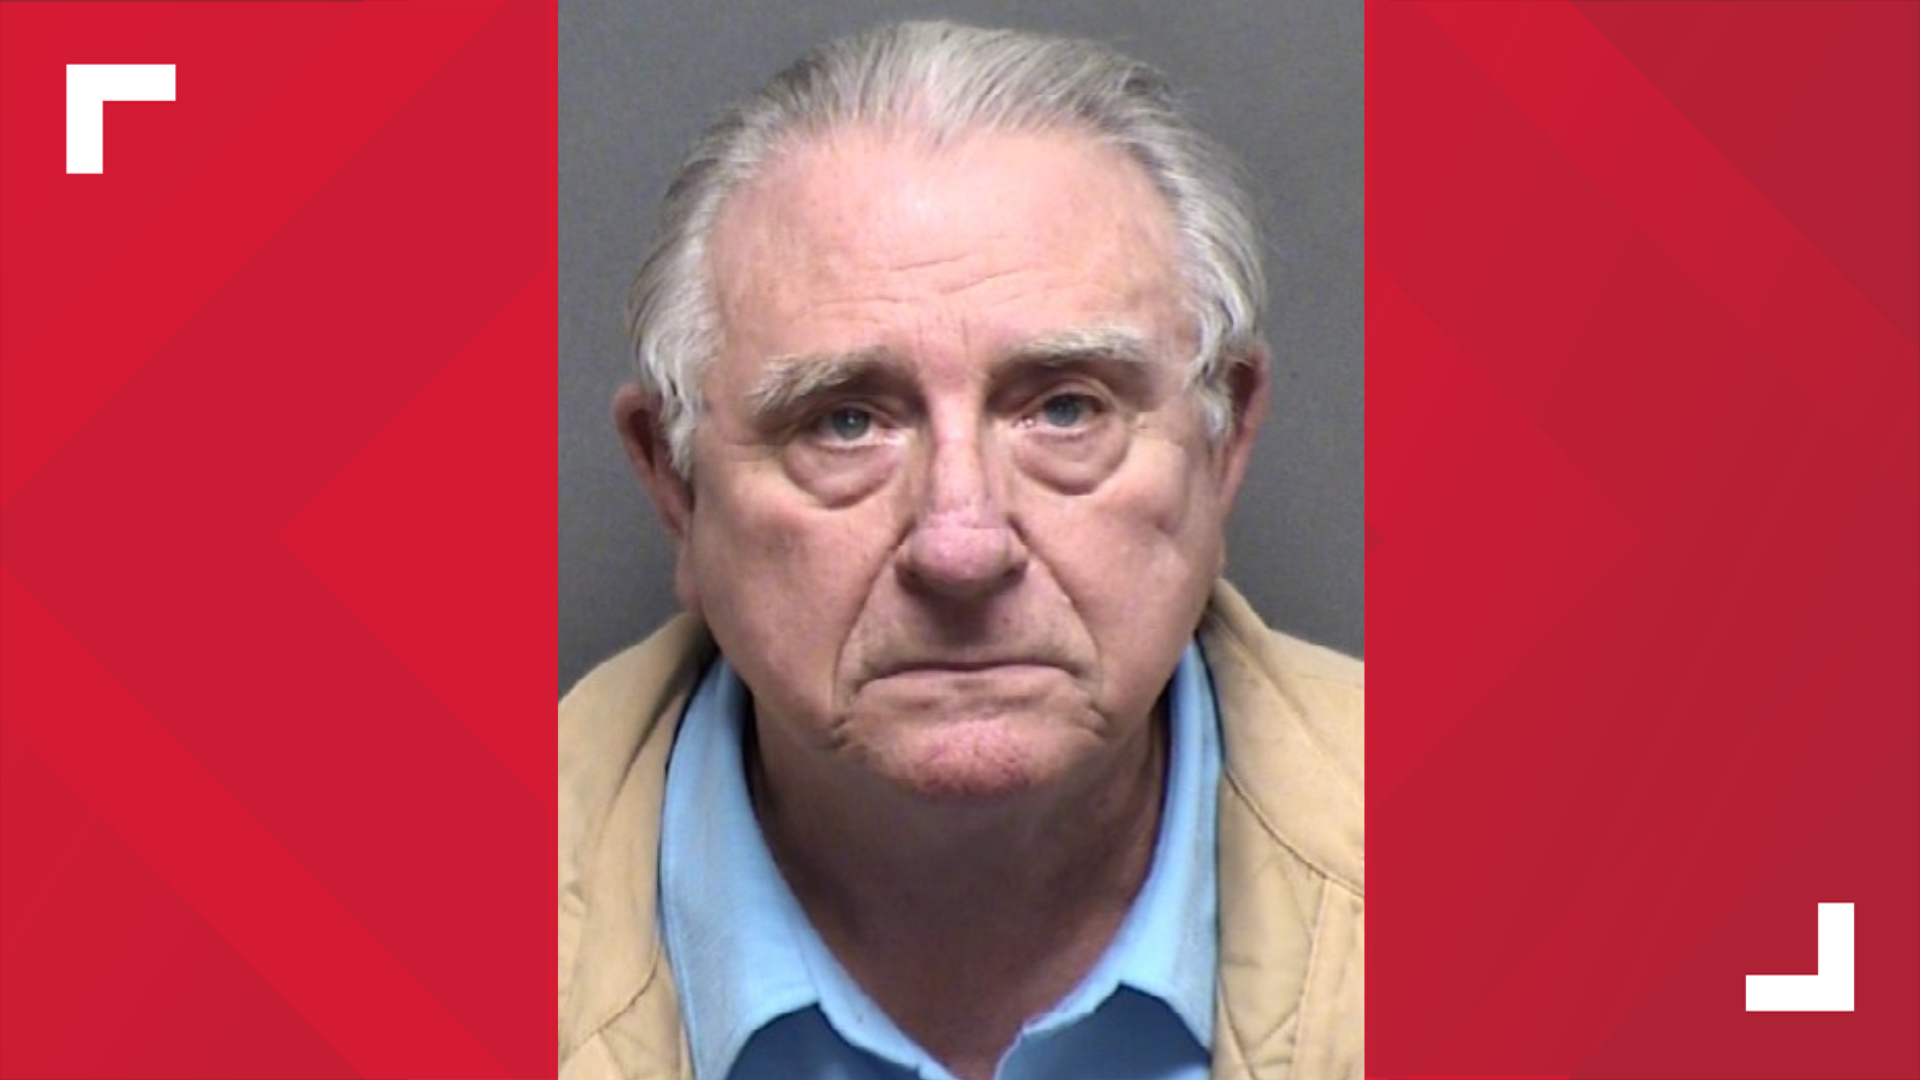 76-year-old man sentenced to 80 years in prison in connection to state, federal child sex charges kens5 image